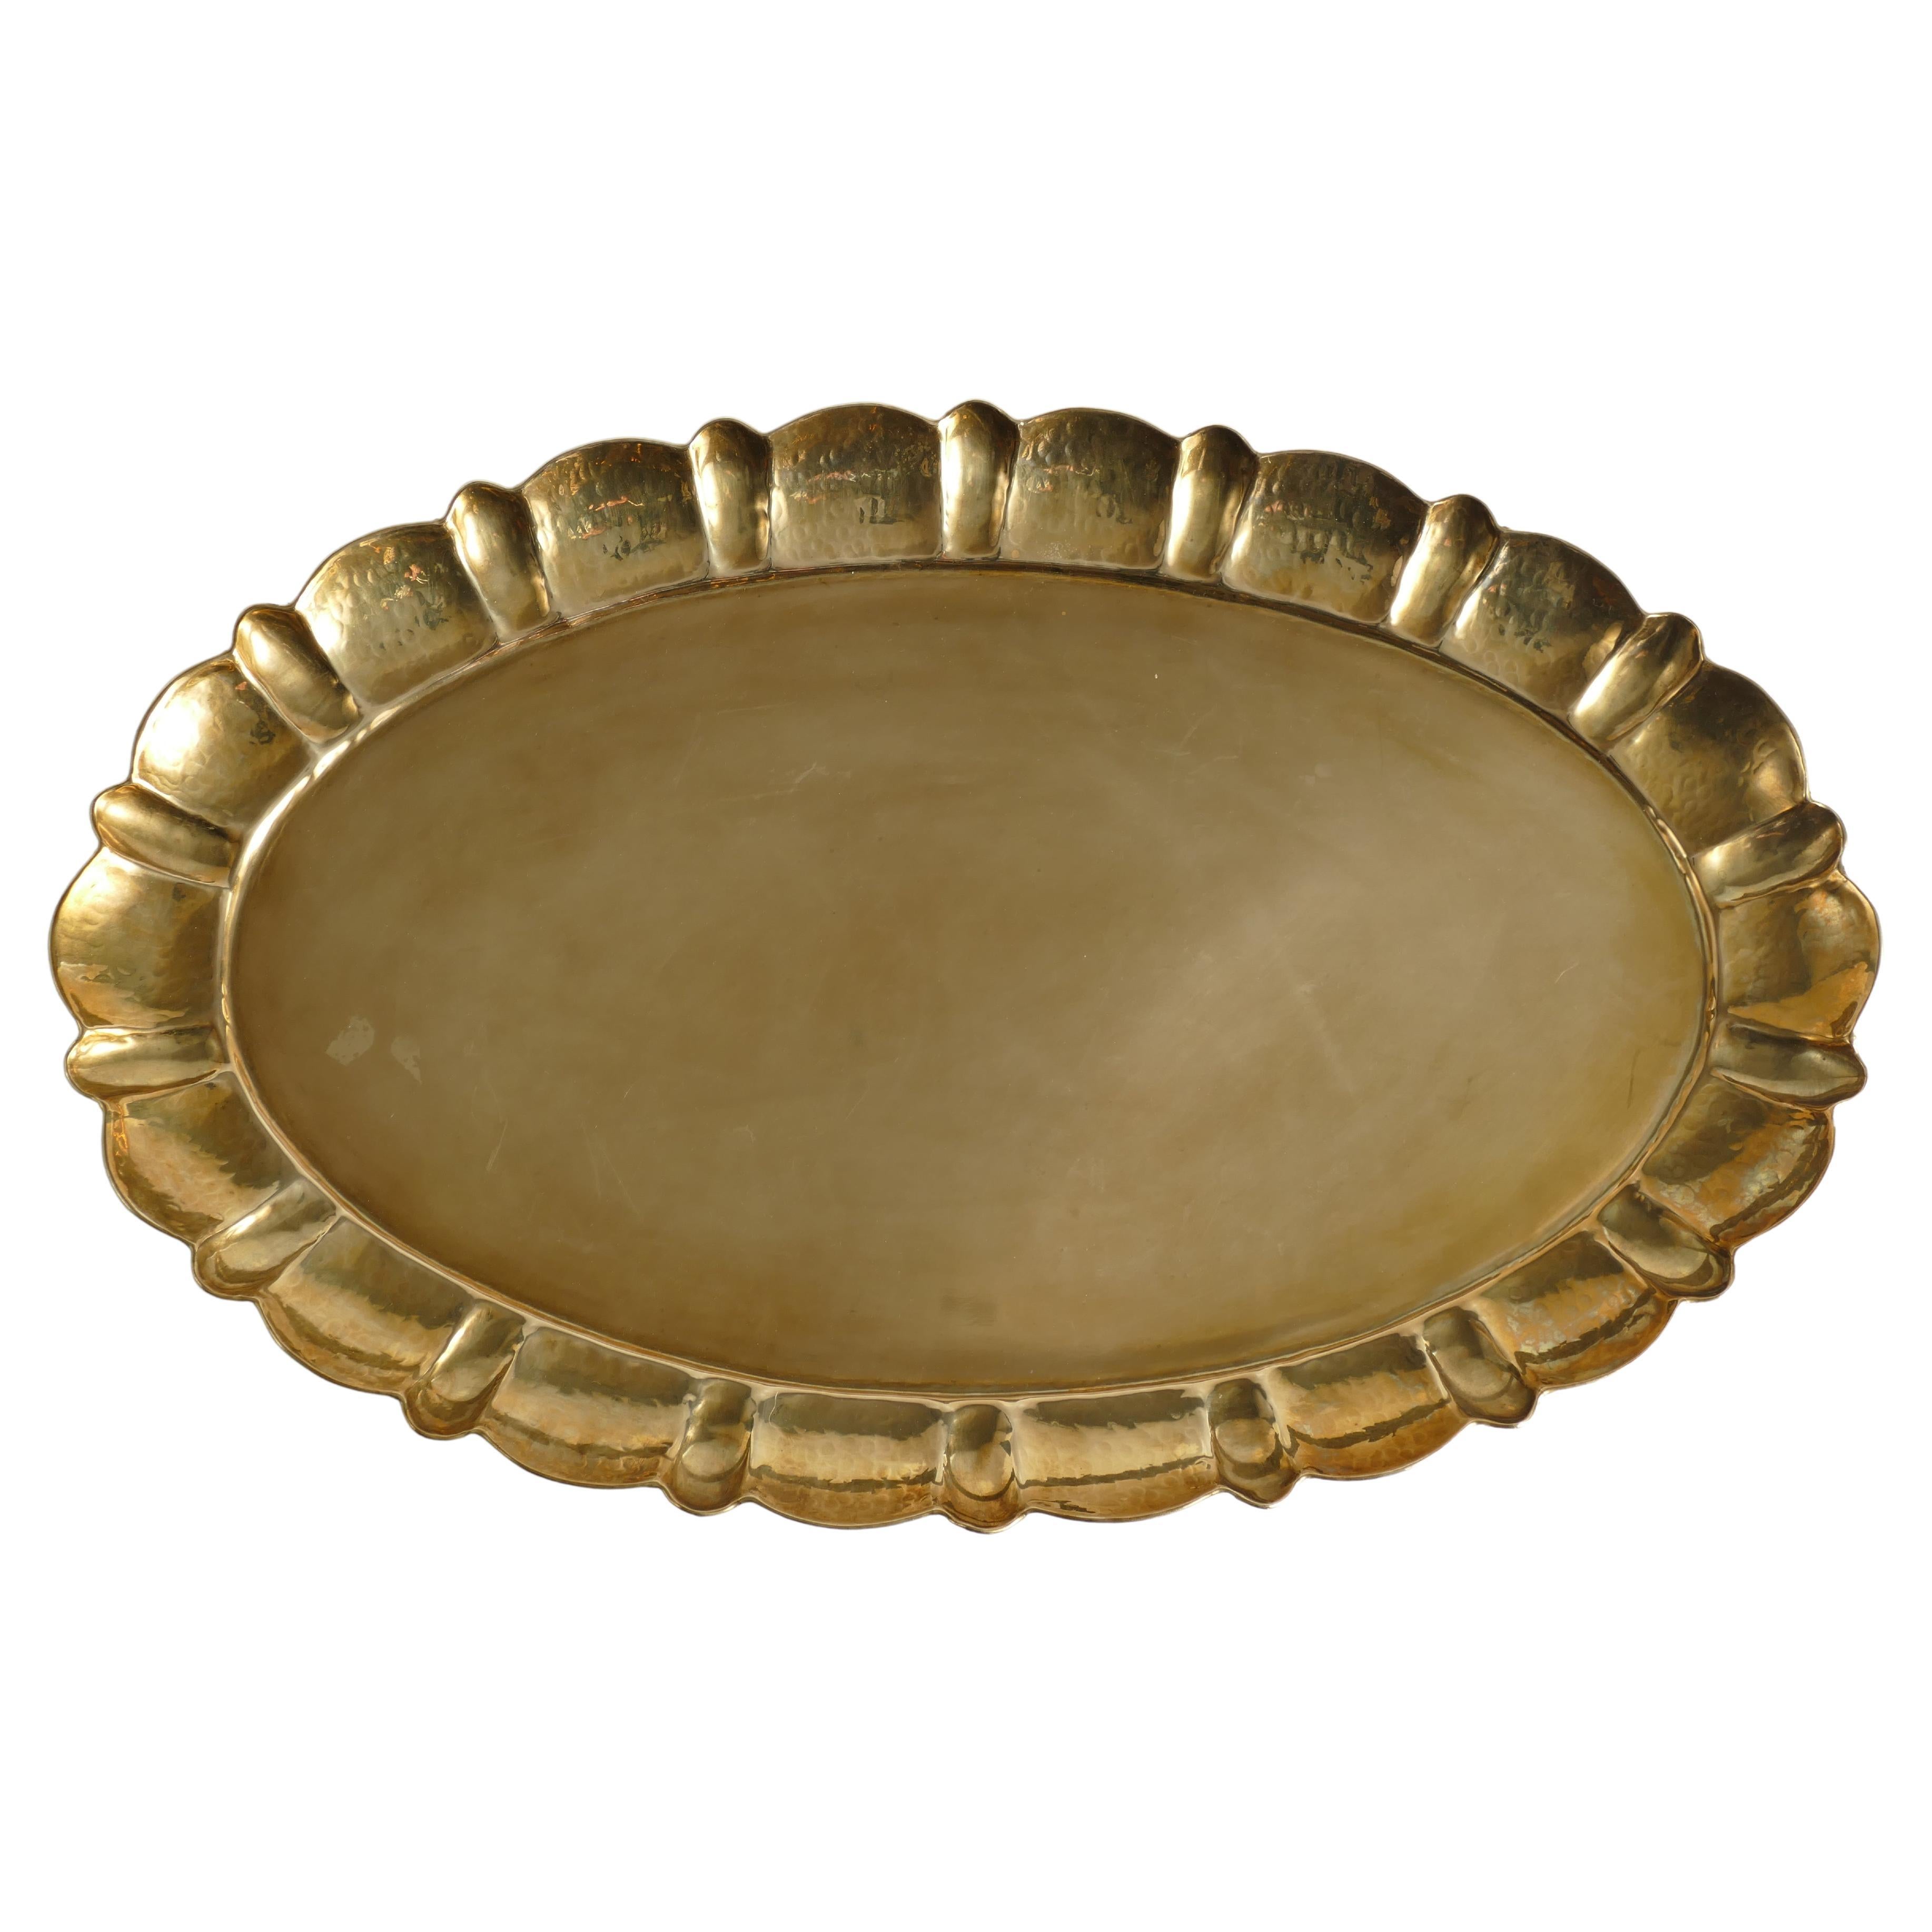 Masterfully crafted brass tray featuring an oval shape with a gracefully contoured, hand-hammered edge. Manual operation and stamped for authenticity. The hammered decor and profiled edge enhance its unique charm. This exquisite tray, designed by